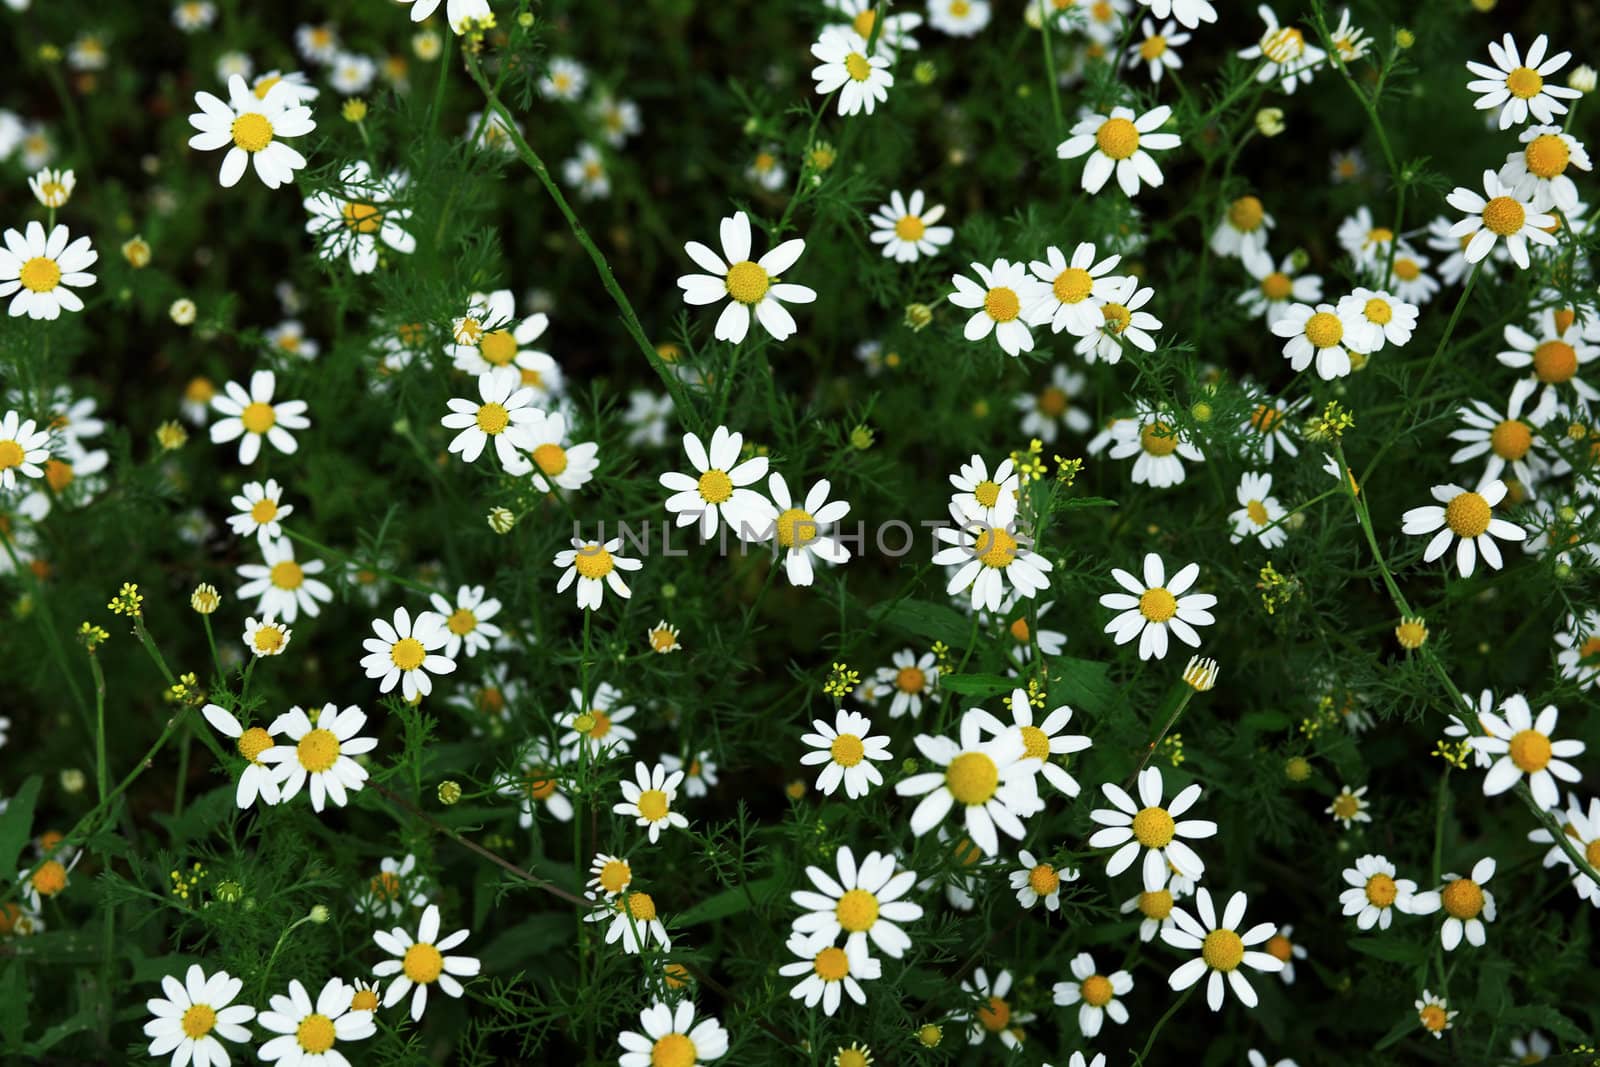 An image of many small flowers on a green floor